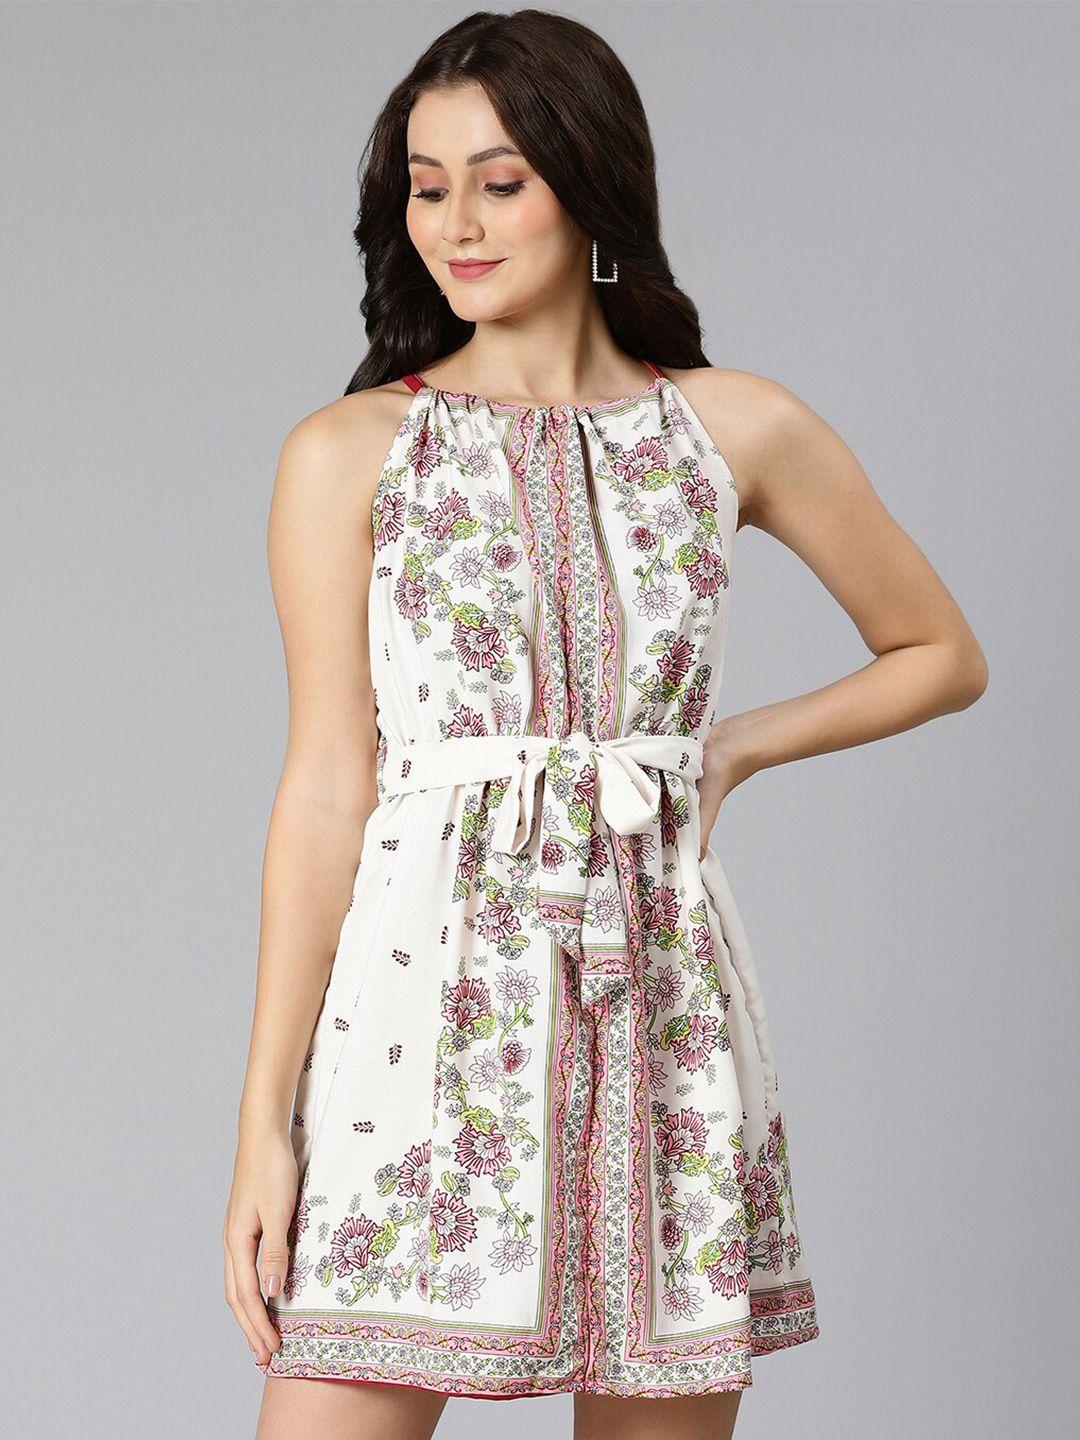 oxolloxo white & red floral dress